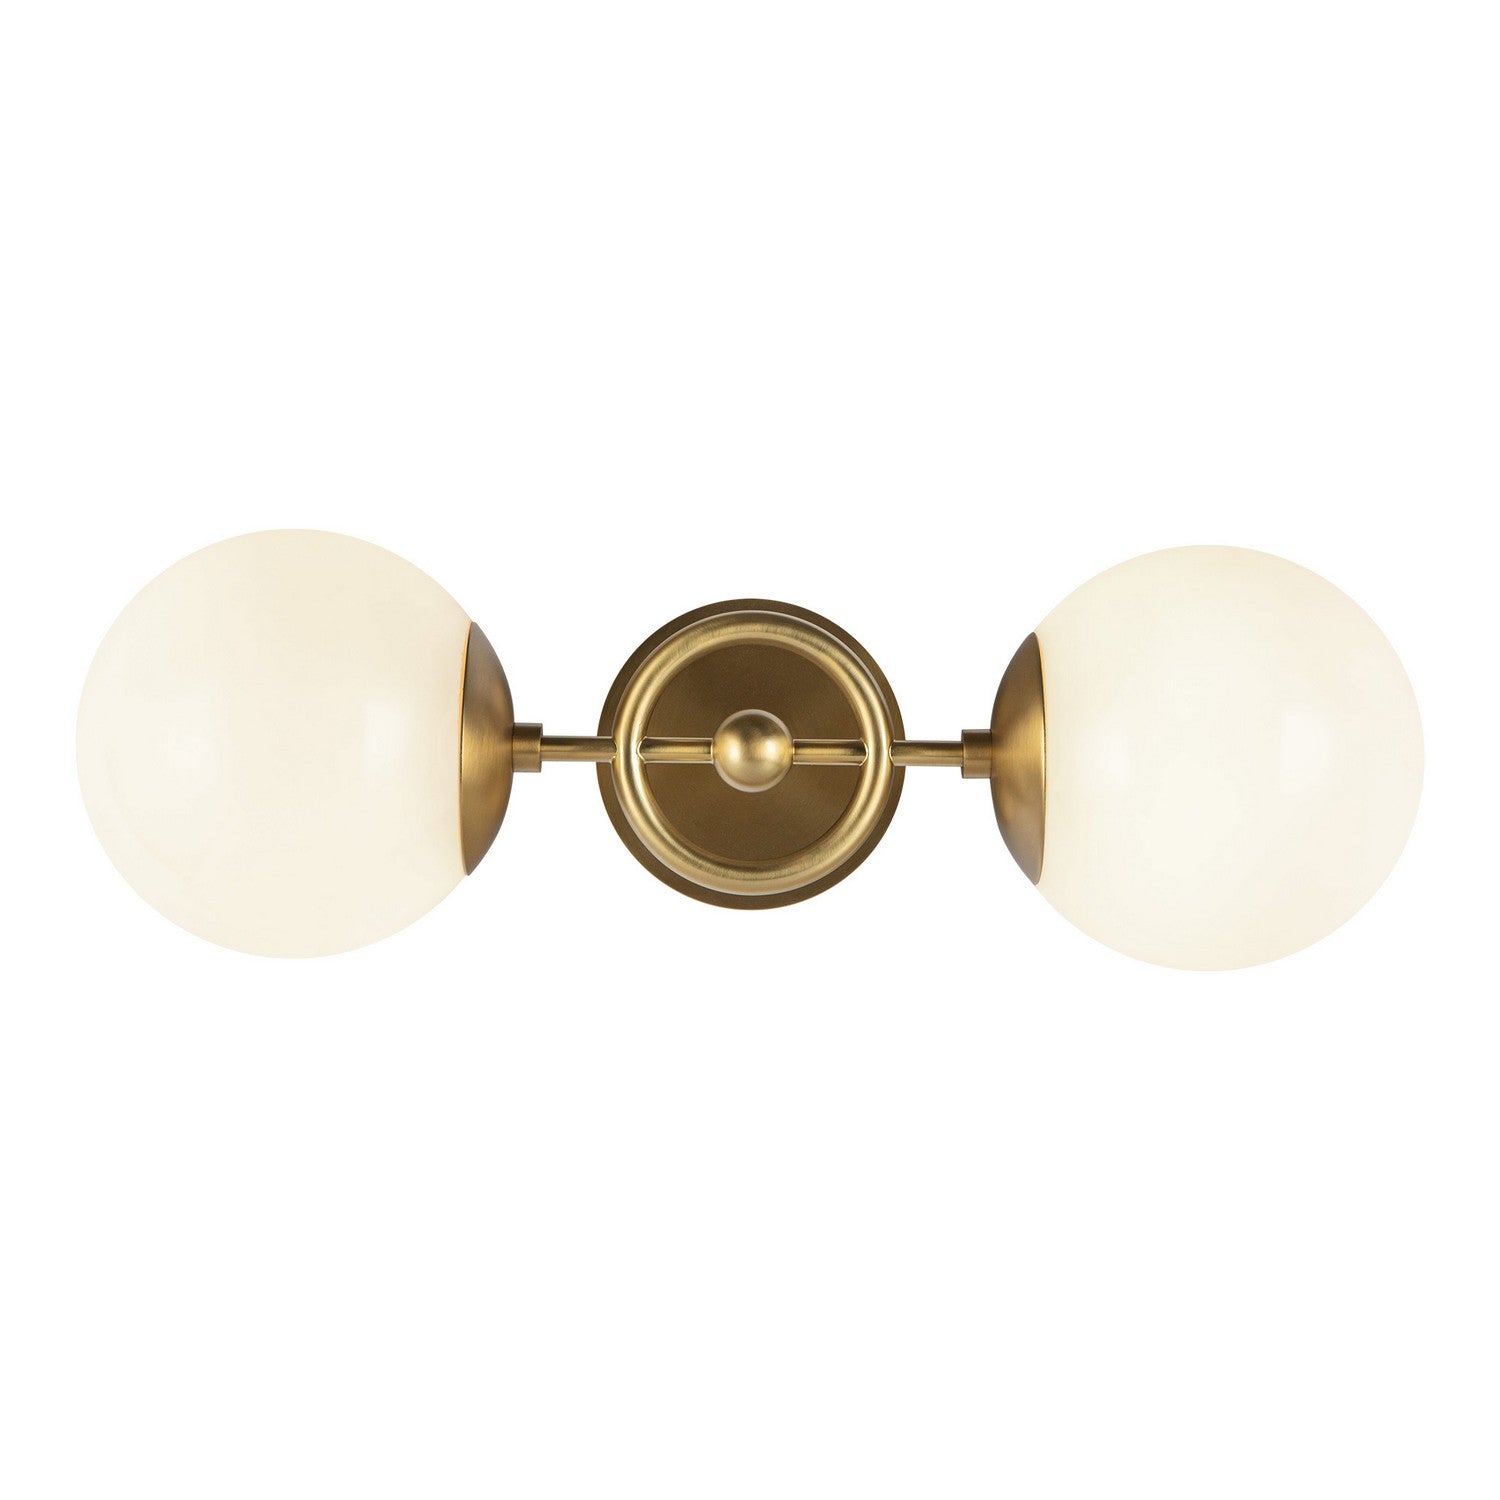 Alora - WV407618BGGO - Two Light Wall Vanity - Fiore - Brushed Gold/Glossy Opal Glass